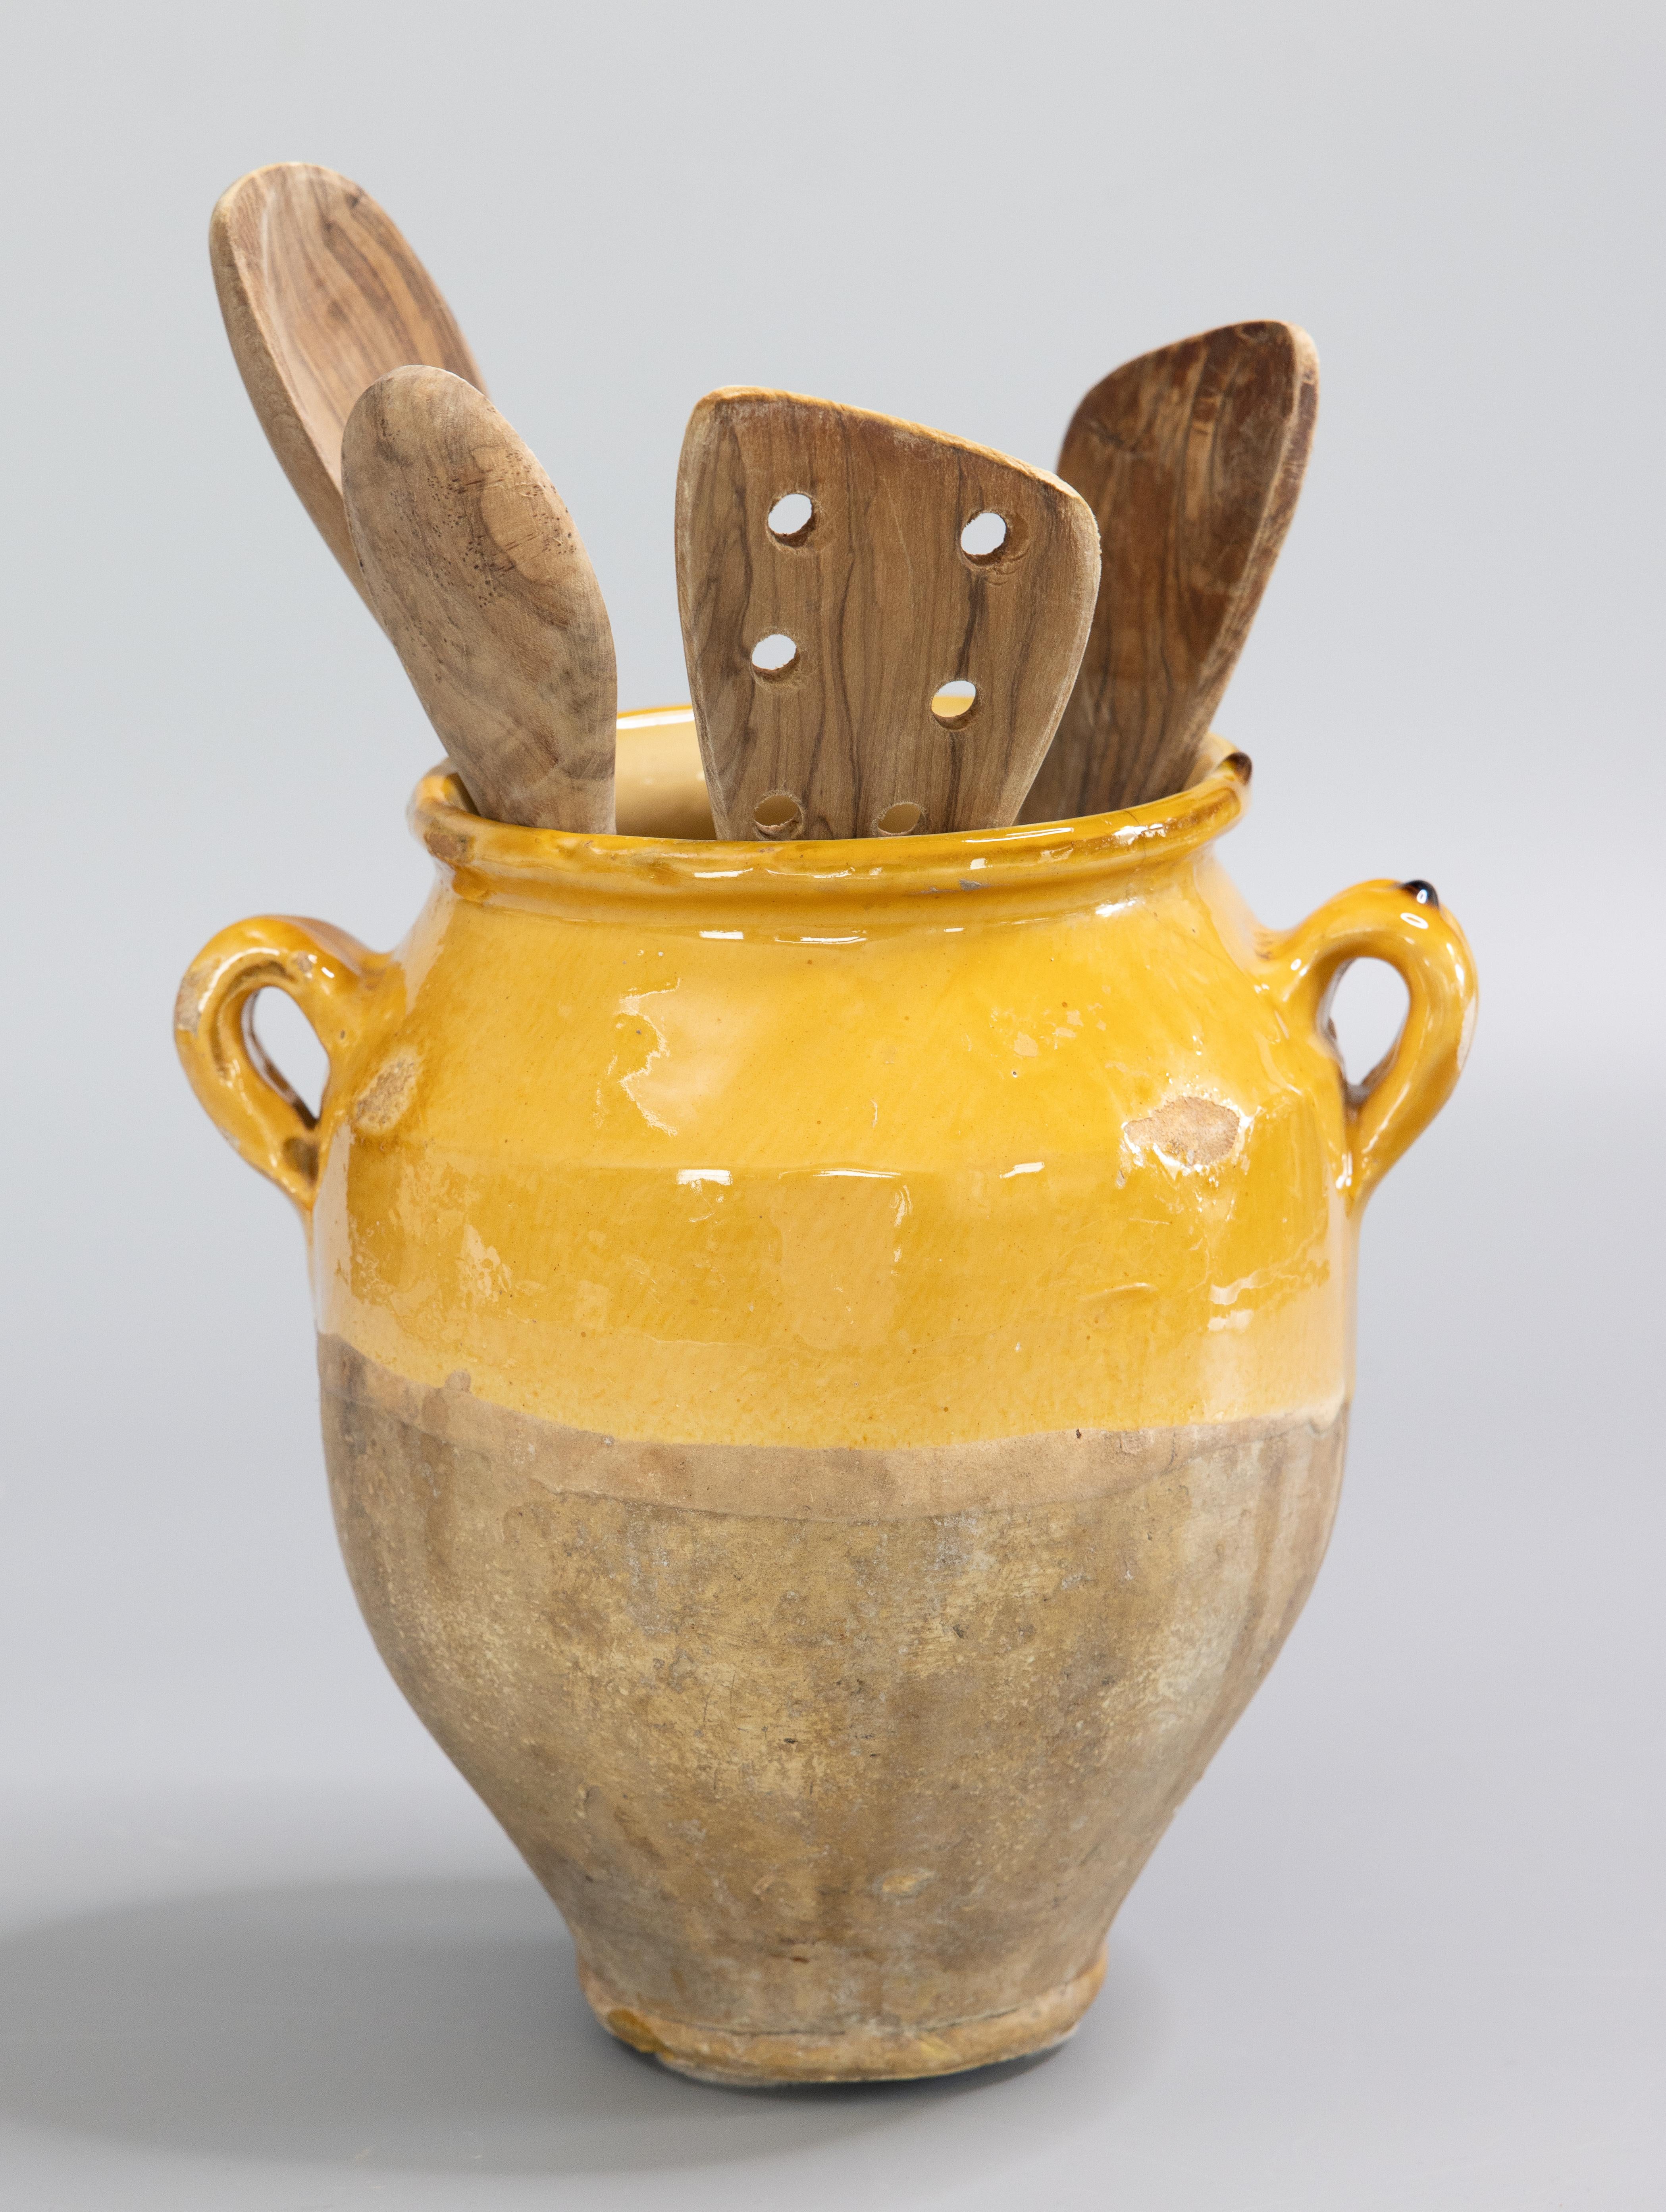 A superb 19th century French confit pot with lovely drippy mustard yellow glaze. This pot or planter is hand thrown with charming handles known as 'ears'. These jars were used for storing and preserving cooked meat. It would be beautiful with a